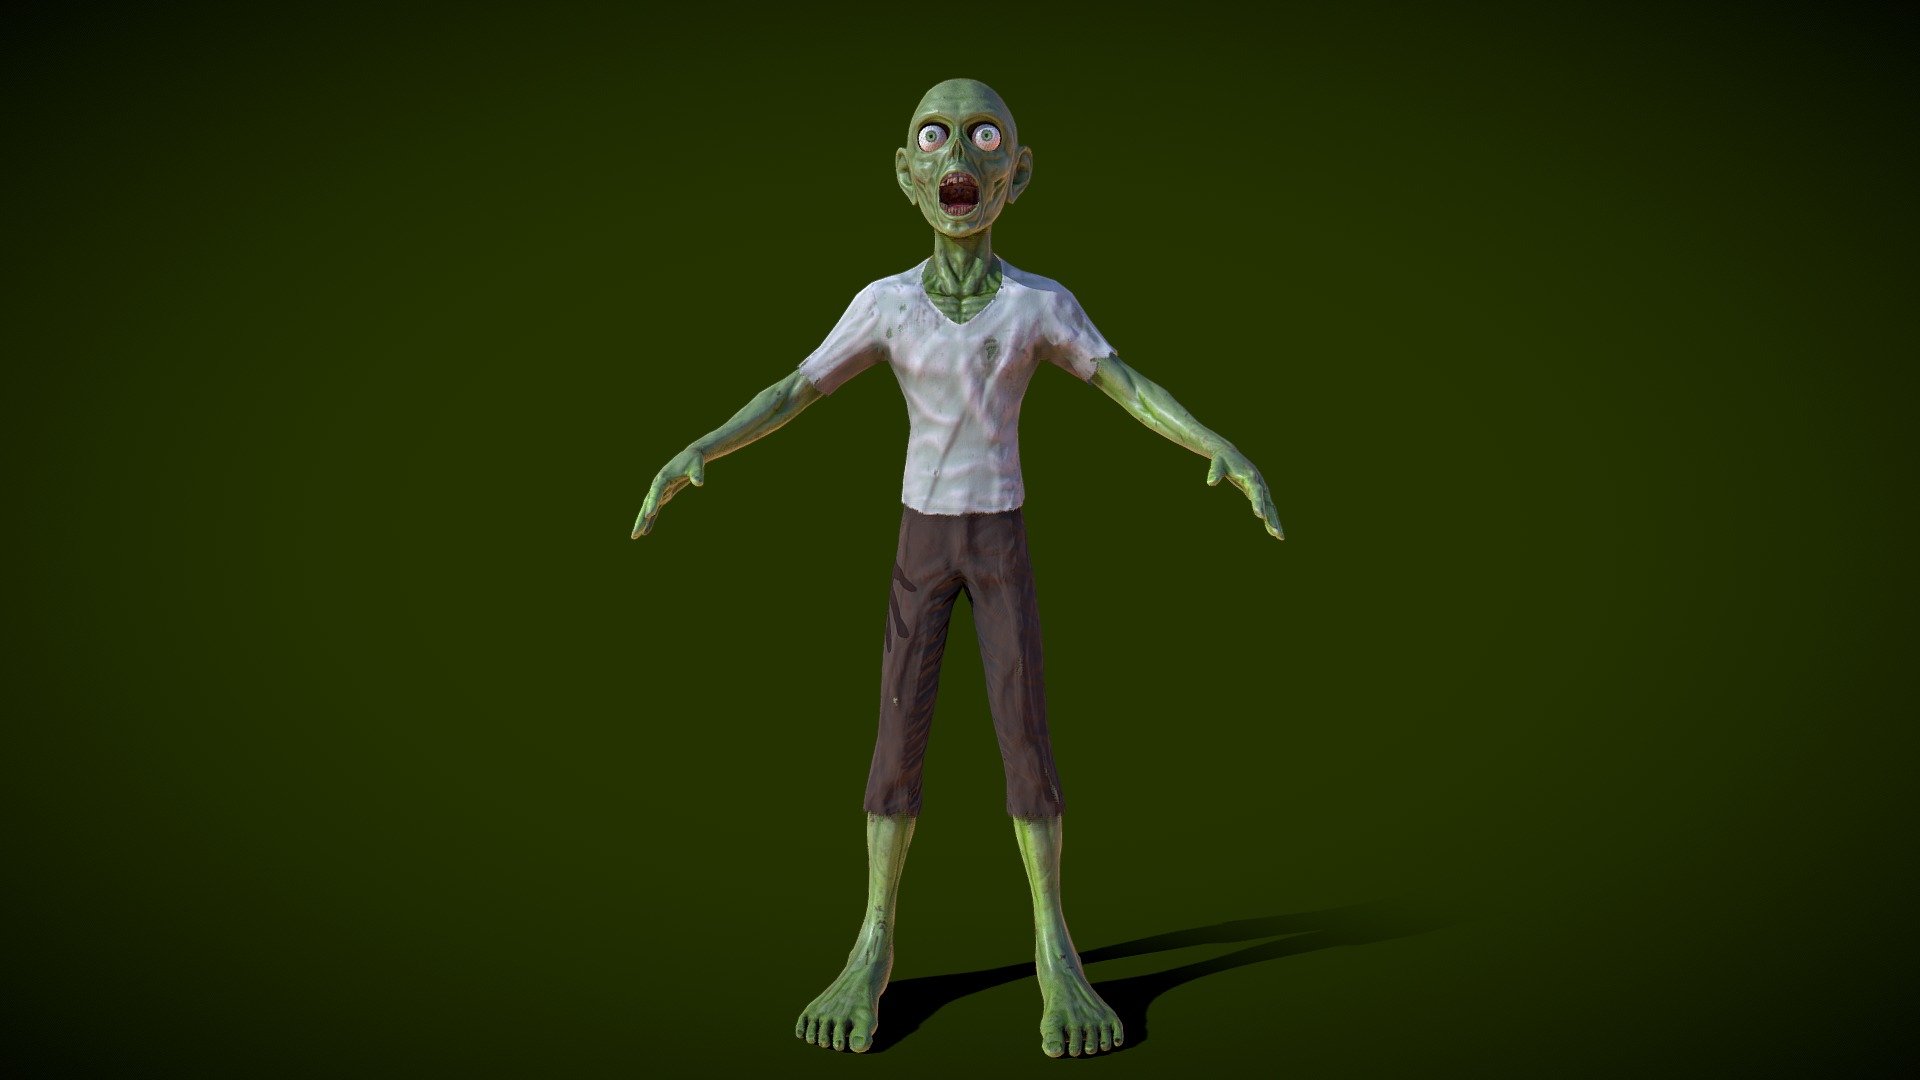 An animatable Zombie character model with PBR textures (Ambient,Color, Metallic, Roughness, Opacity) 3d model